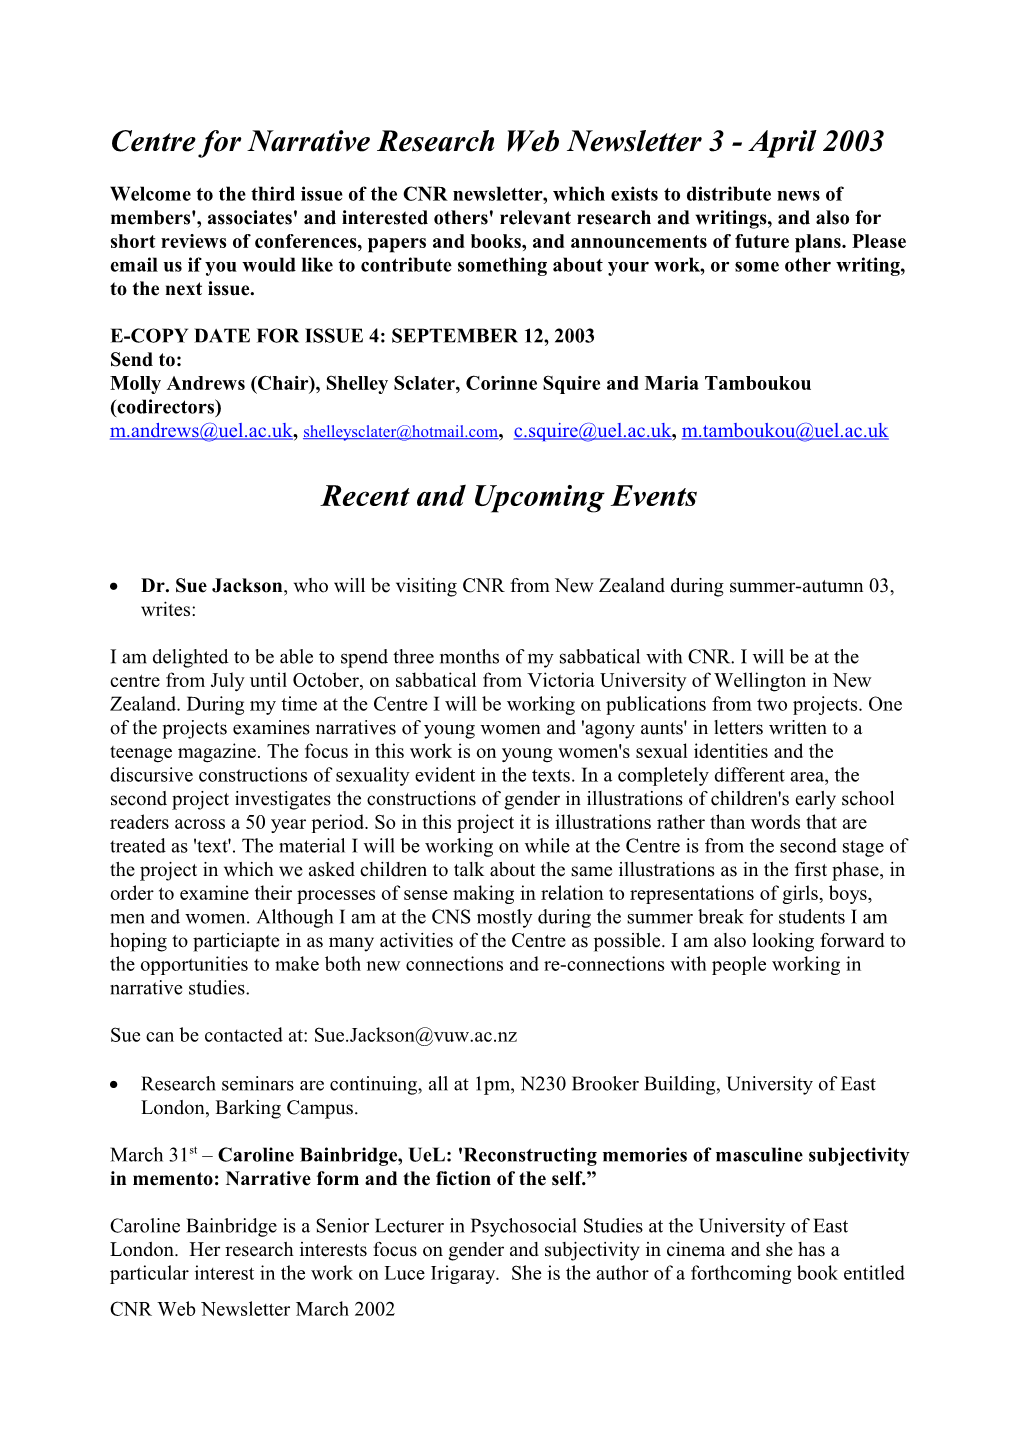 Centre for Narrative Research Web Newsletter 1 - April 2002